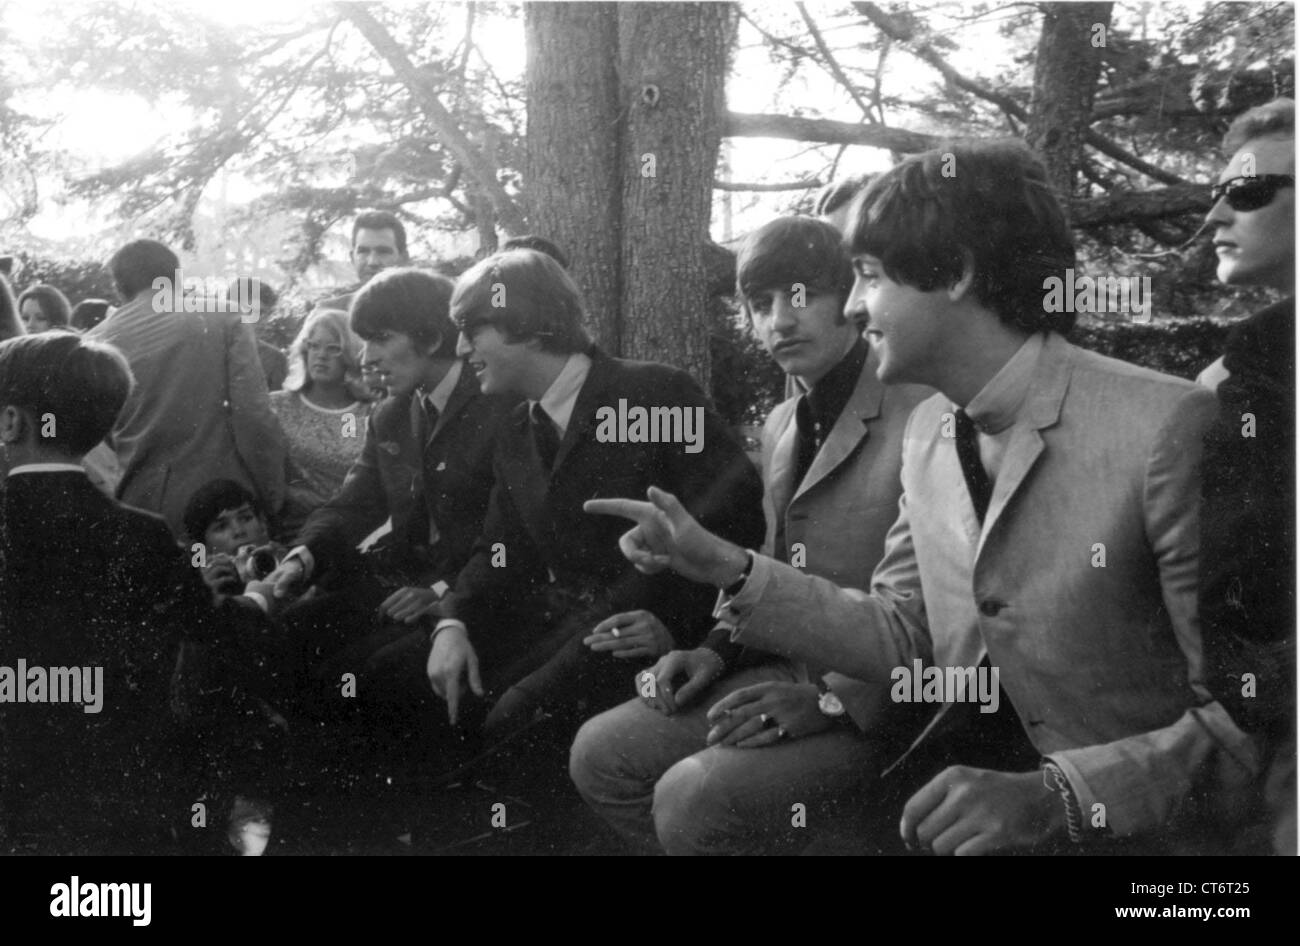 003423 - The Beatles meeting fans in Beverly Hills, Hollywood, California on 24th August 1964 Stock Photo